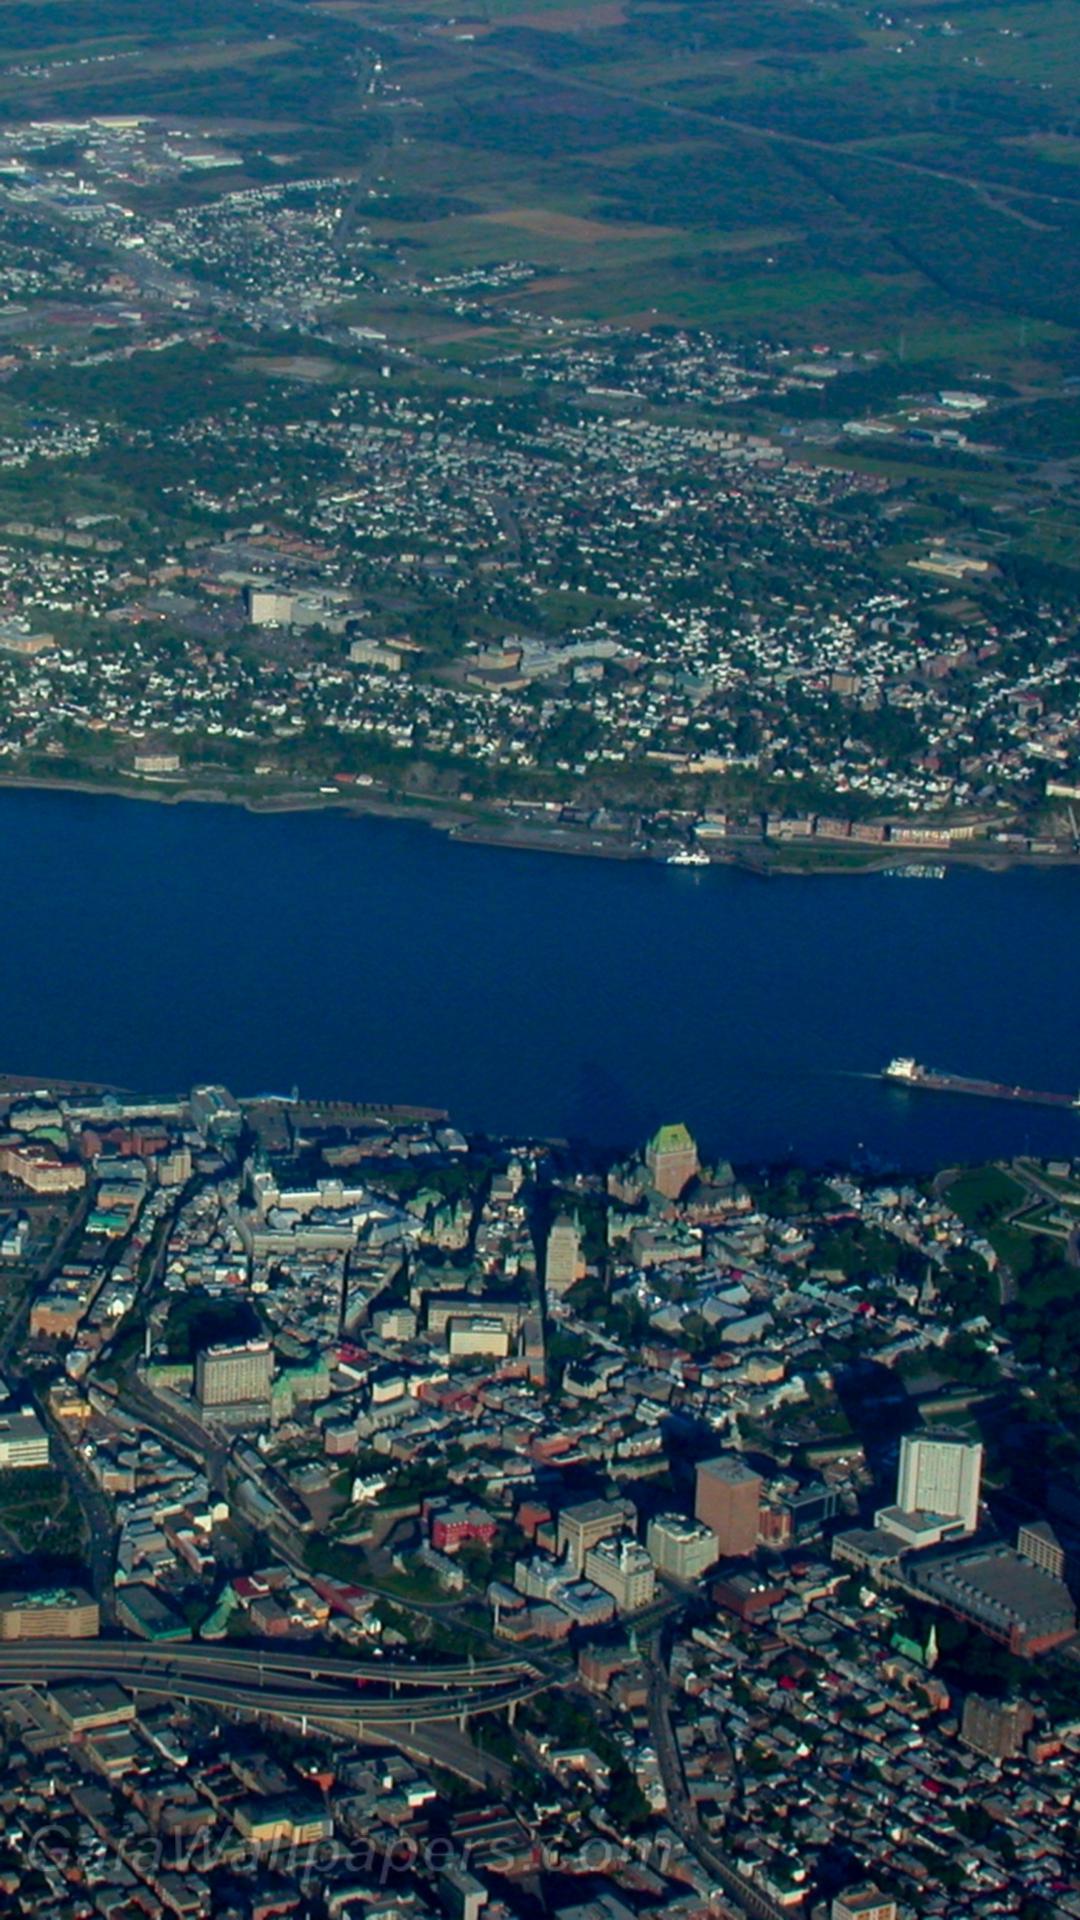 Quebec city seen from the air - Free desktop wallpapers